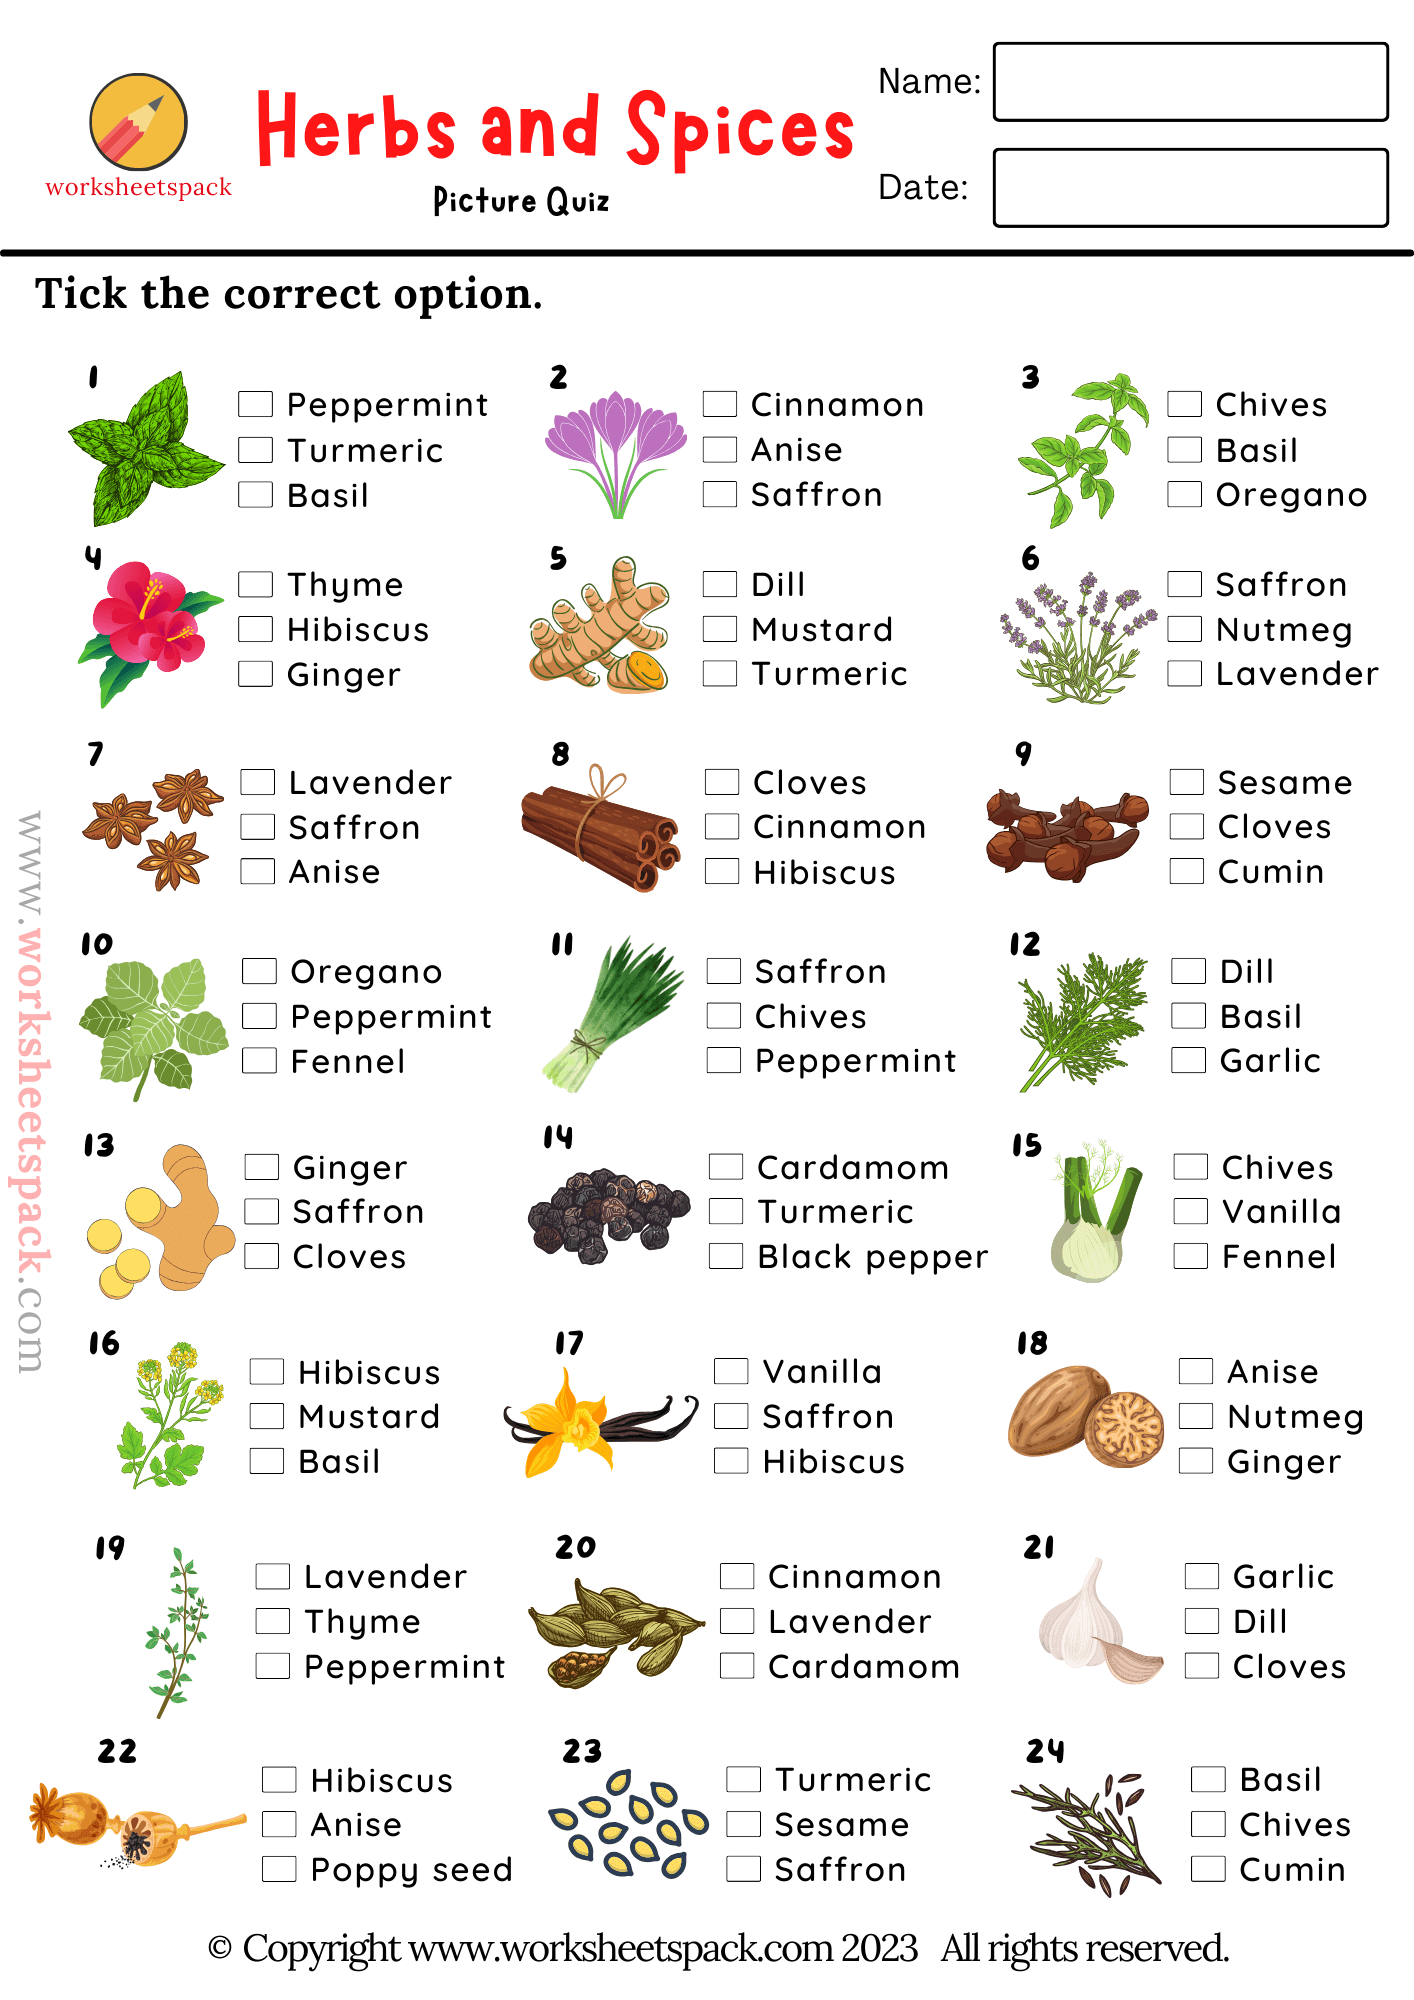 Herbs and Spices Picture Test